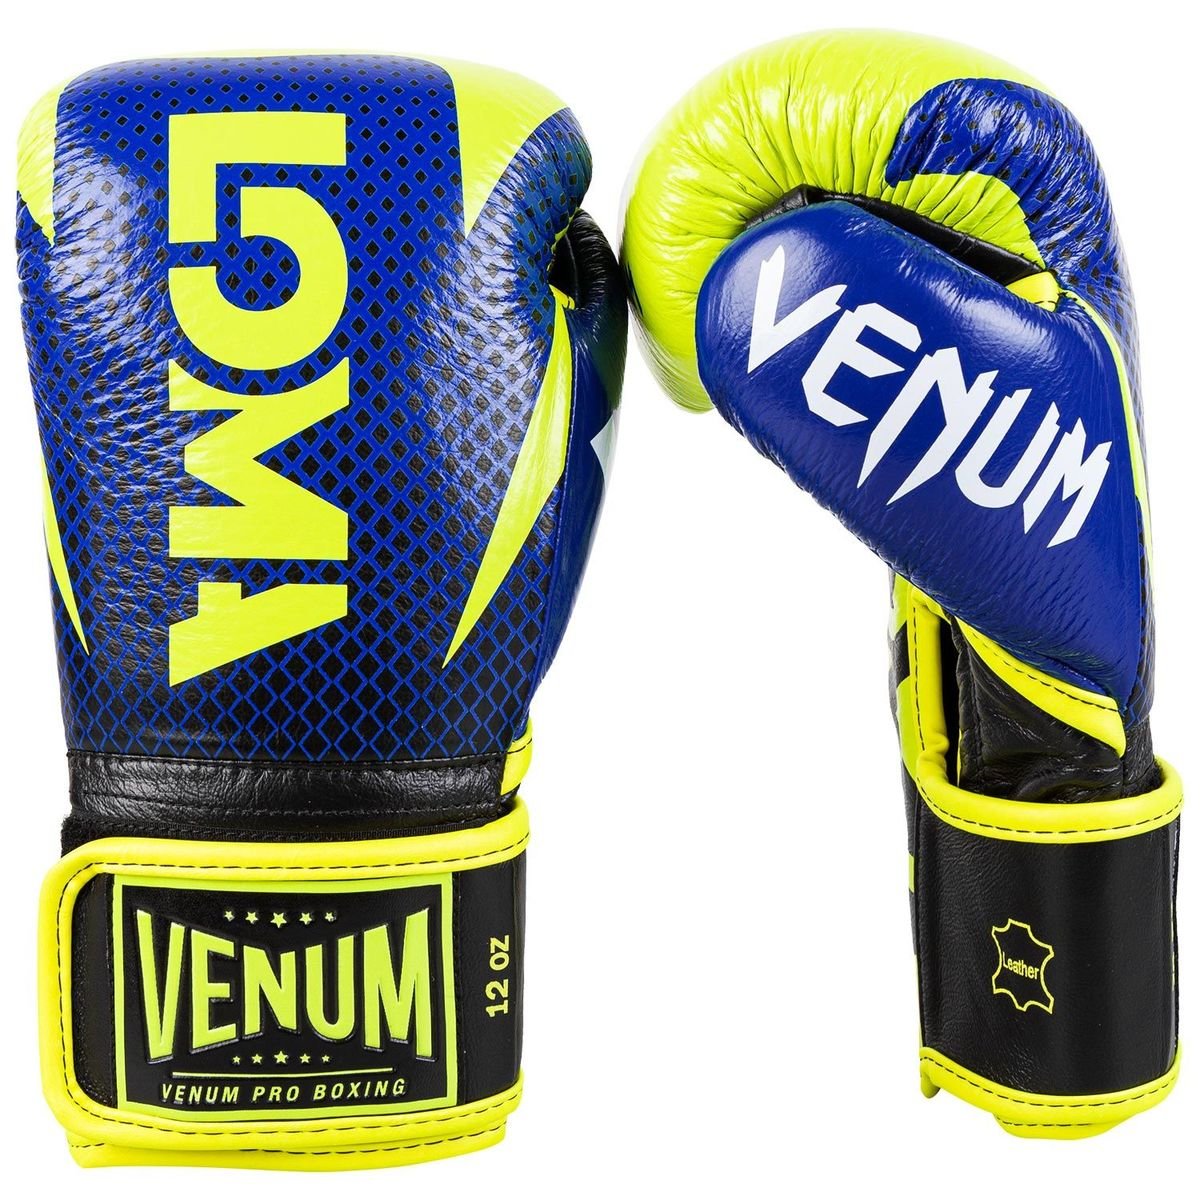 VENUM-03912-405 HAMMER – GLOVES PRO MUAY THAI LOMA BOXING VELCRO AAGsport EDITION